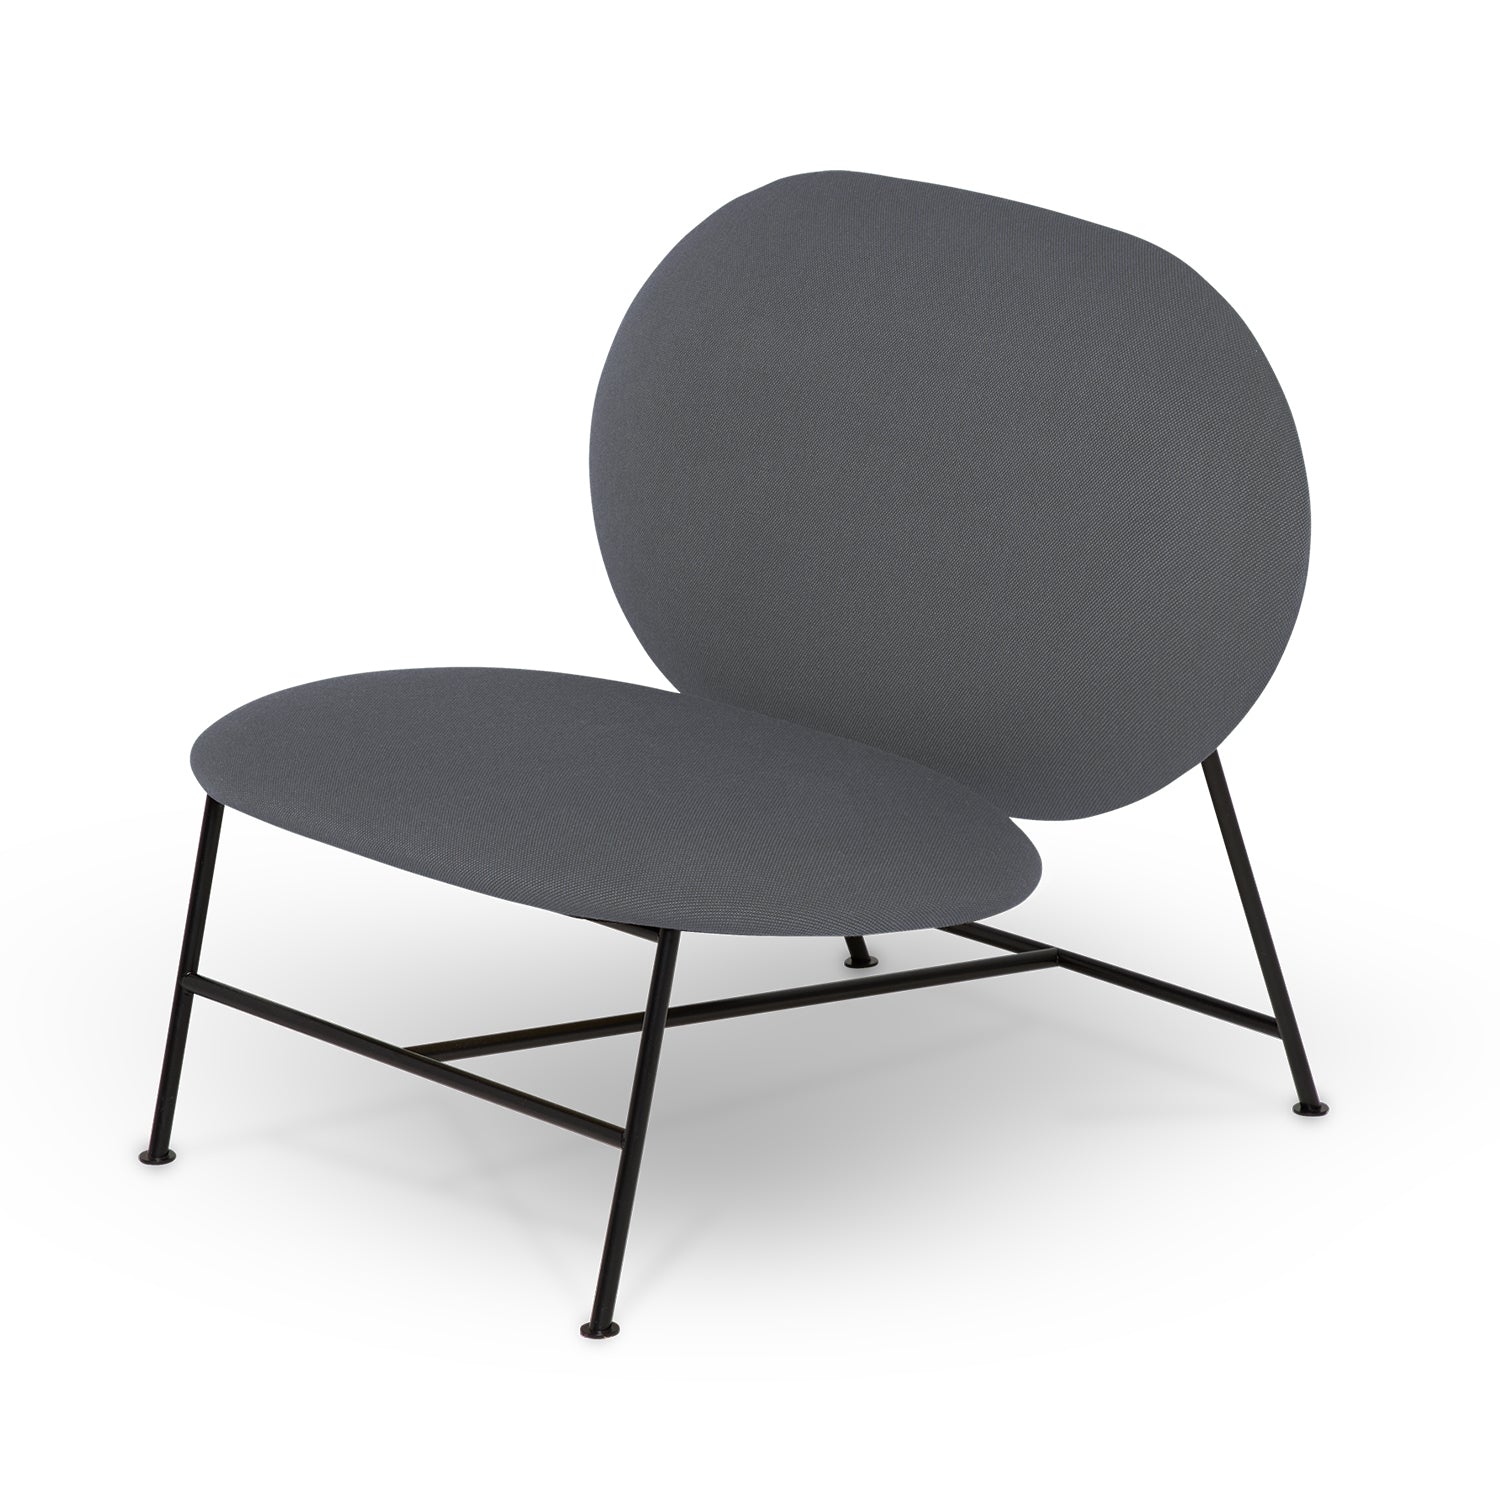 Northern Oblong Lounge Chair in Grey Blue